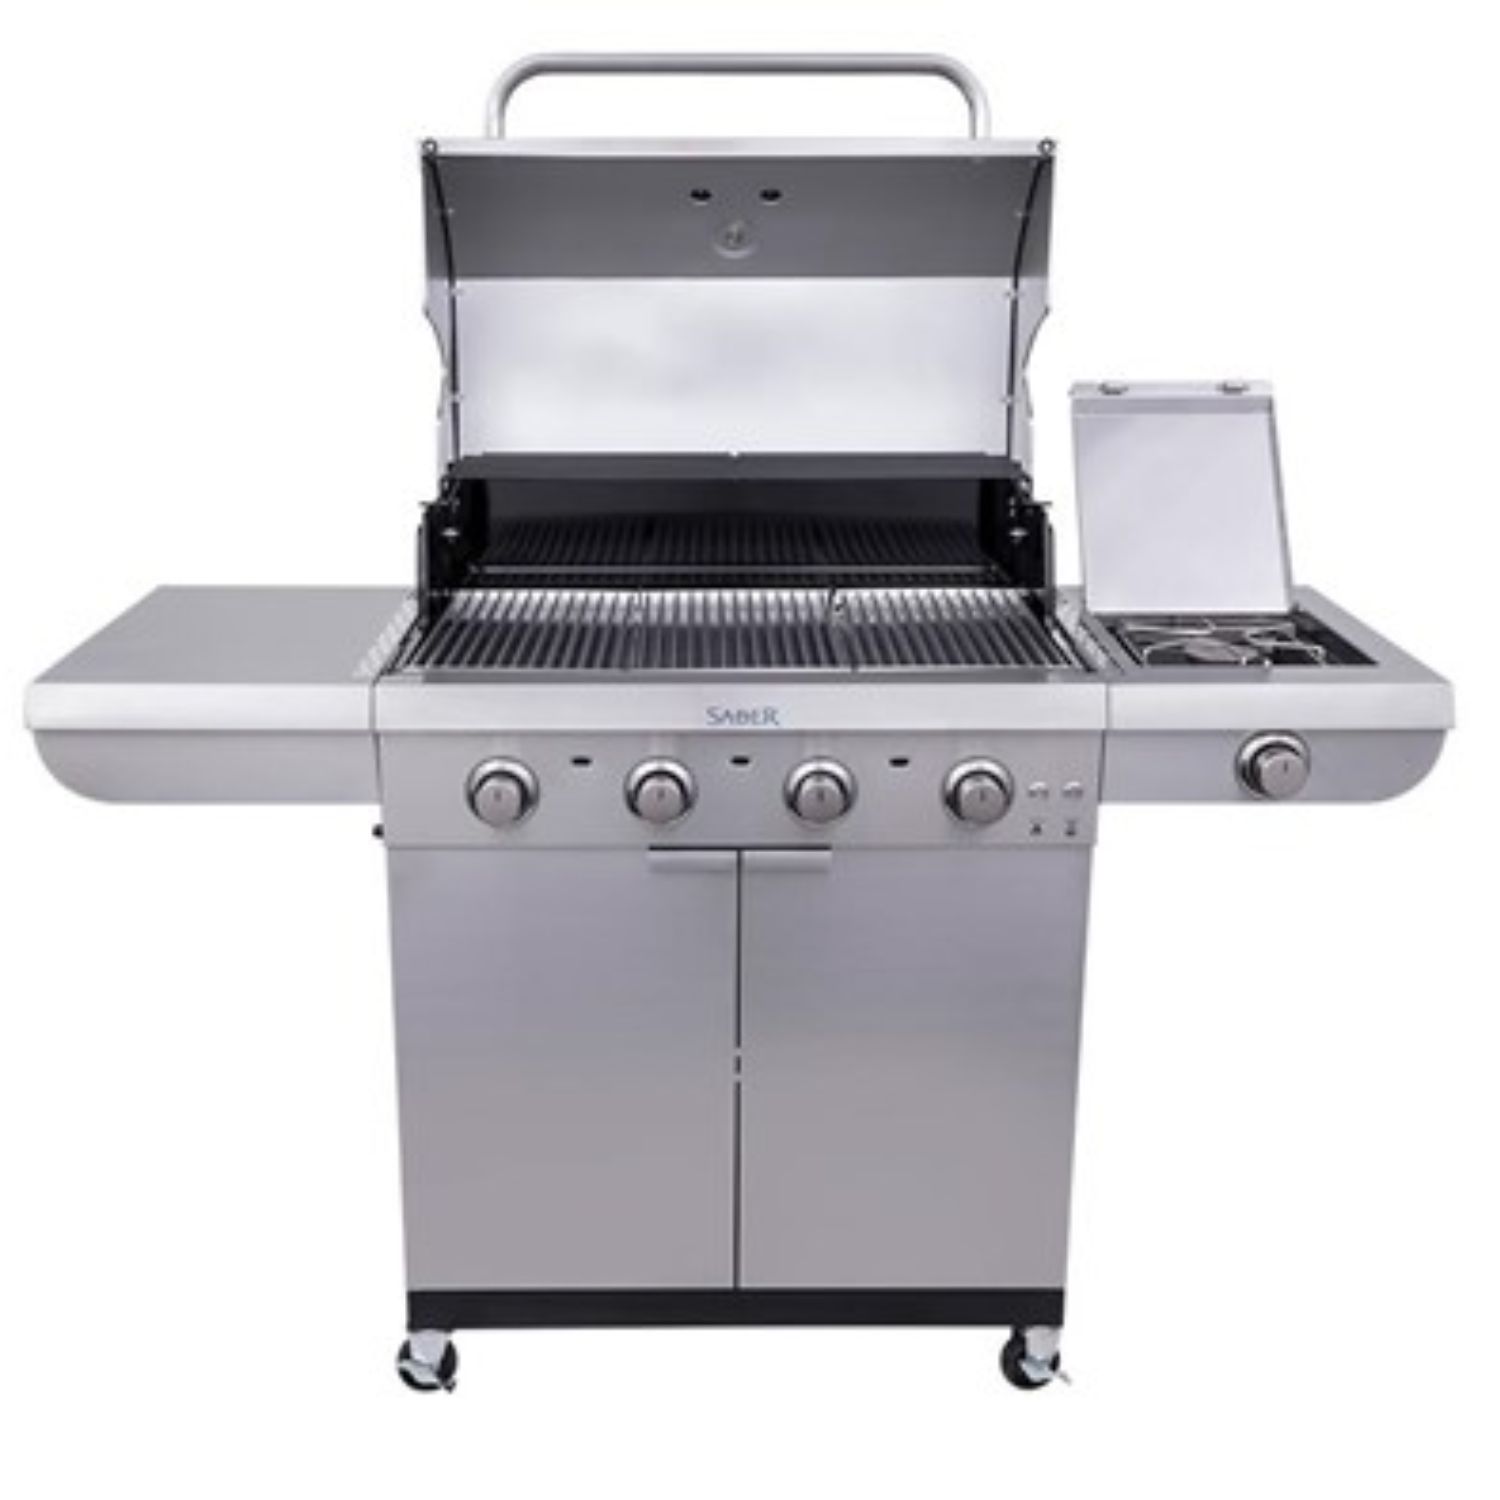 Barbecue Select (4) – Saber Grills